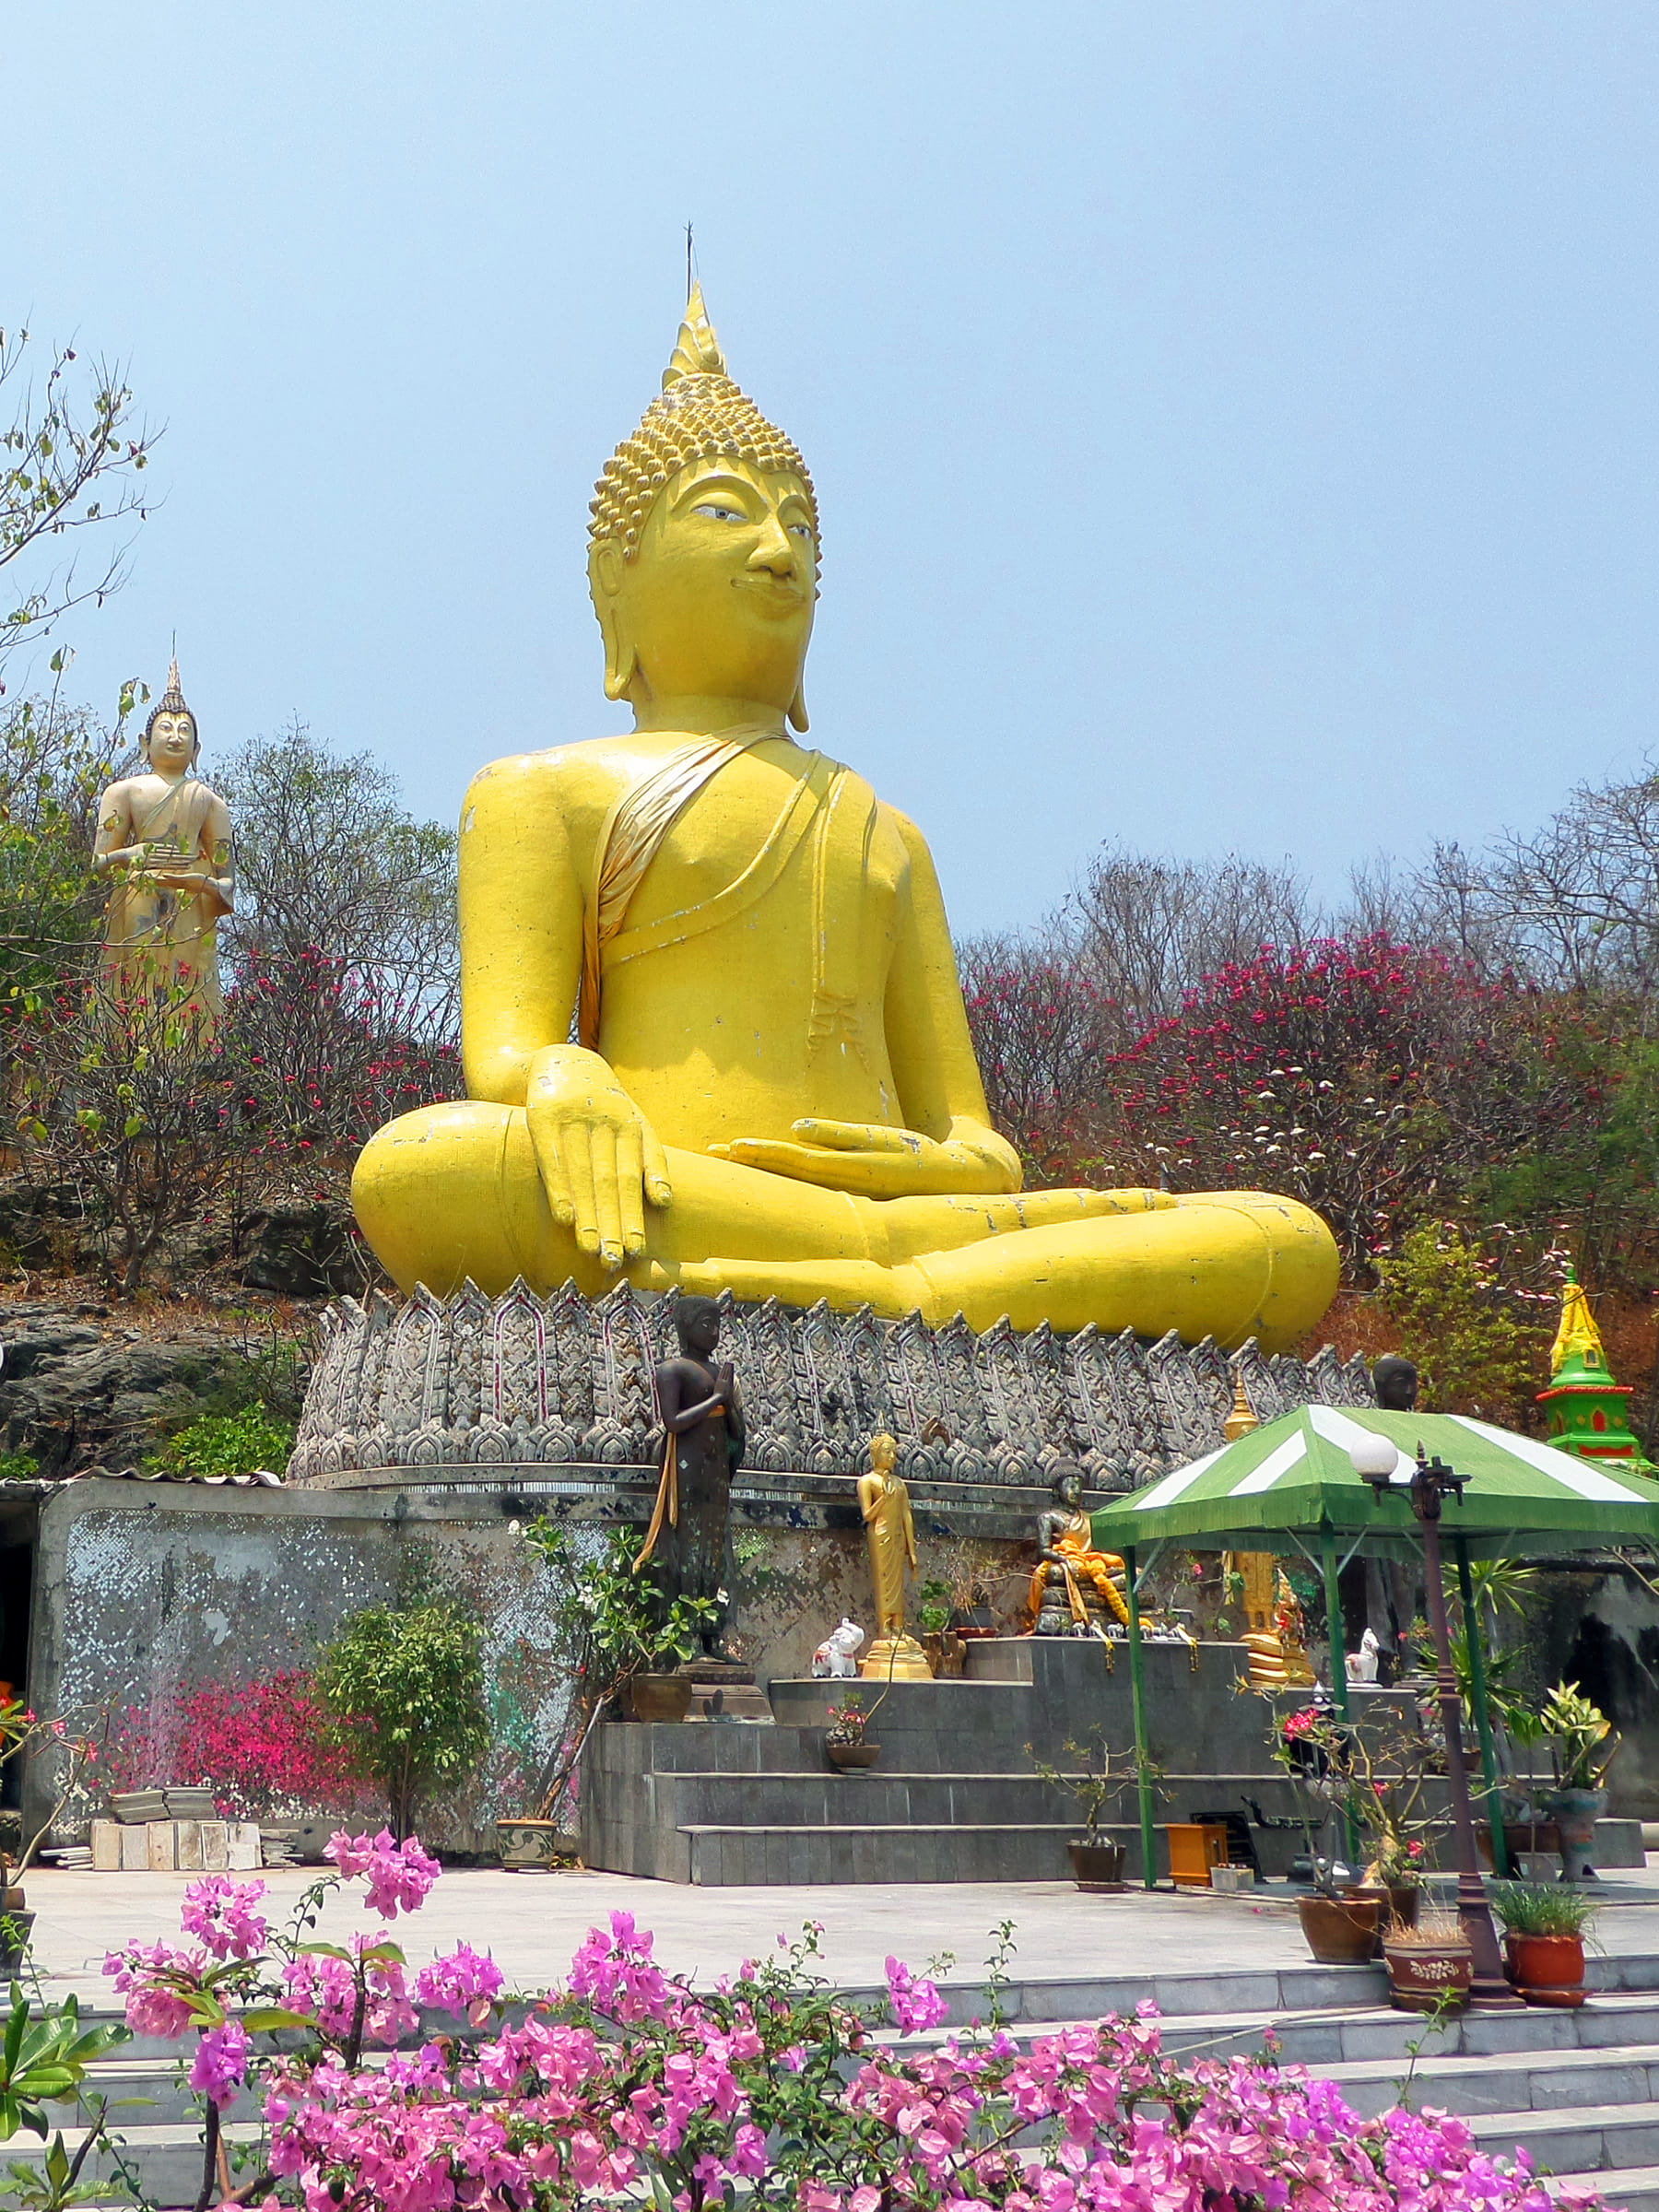 Giant hillside Buddha statue on Koh Sichang Island in the Gulf of Thailand